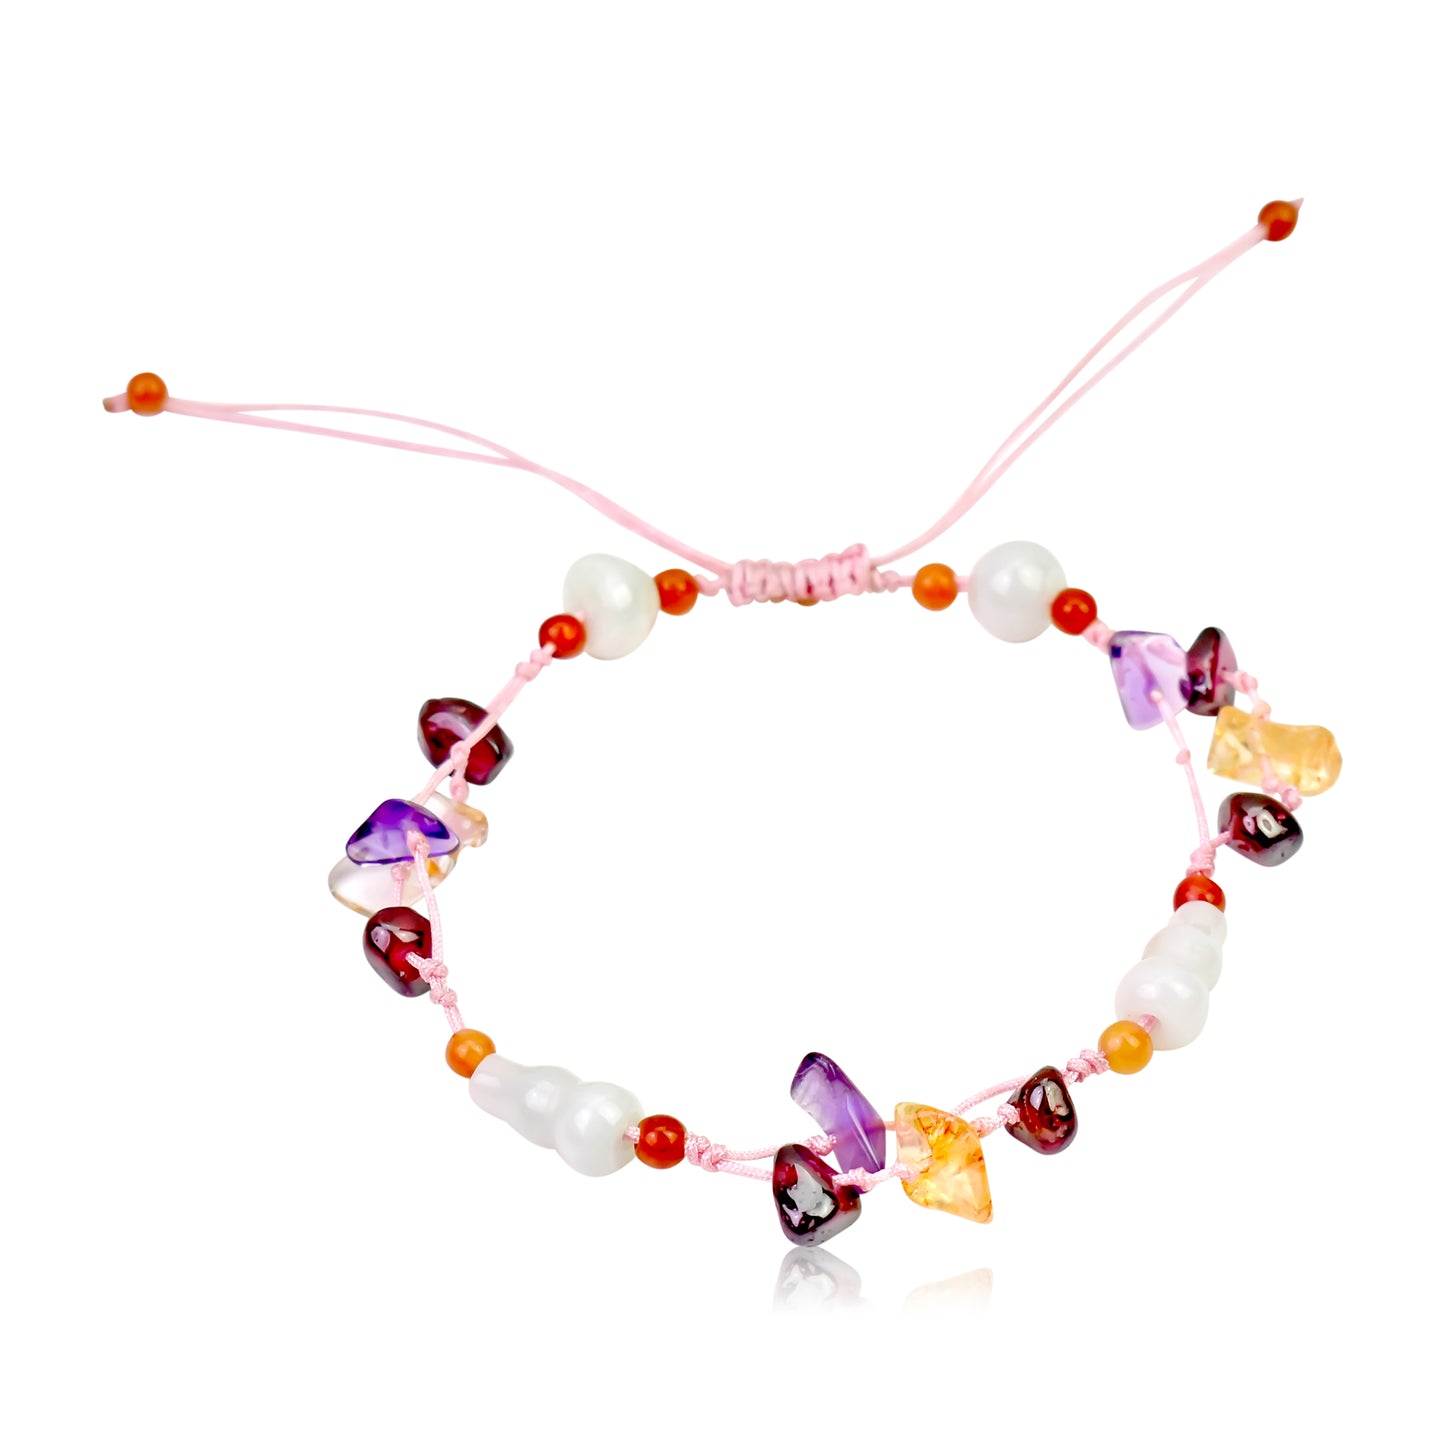 Shine Bright and Feel Gentle with the Fairy Vase Gemstone Bracelet